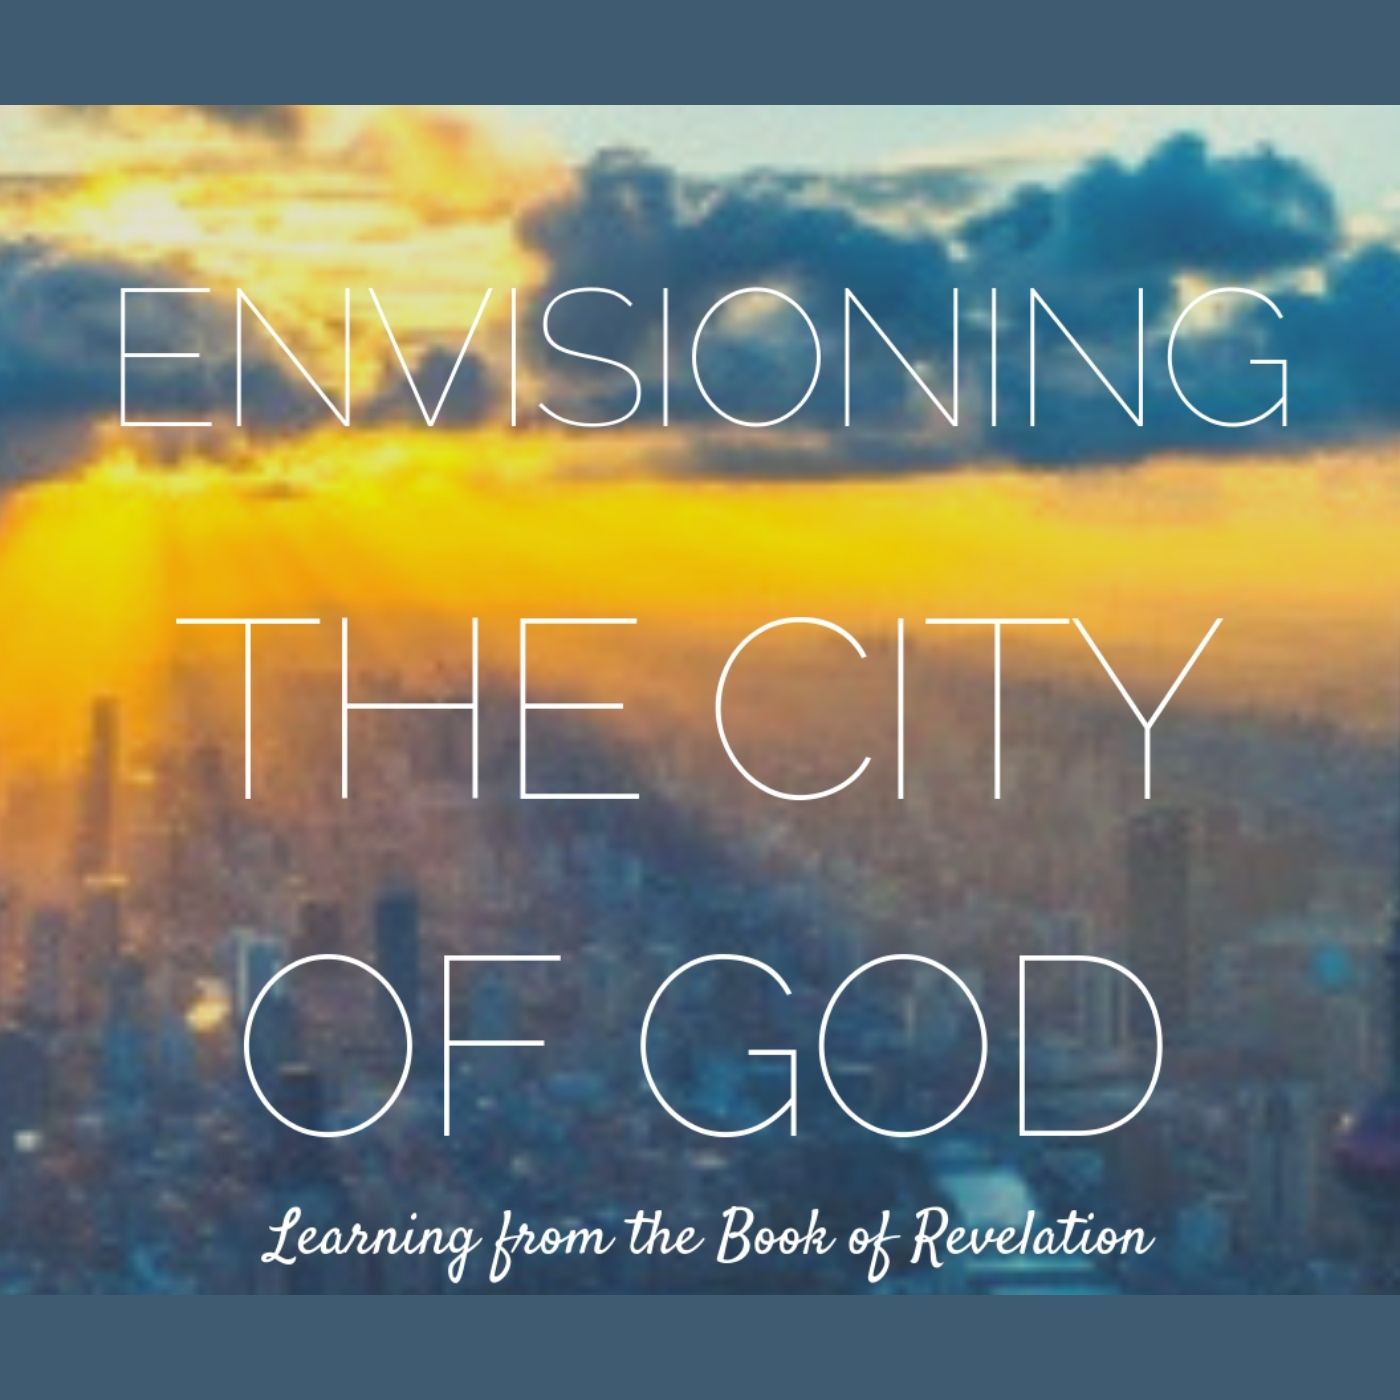 CD cover Envisioning the City of God.jpg